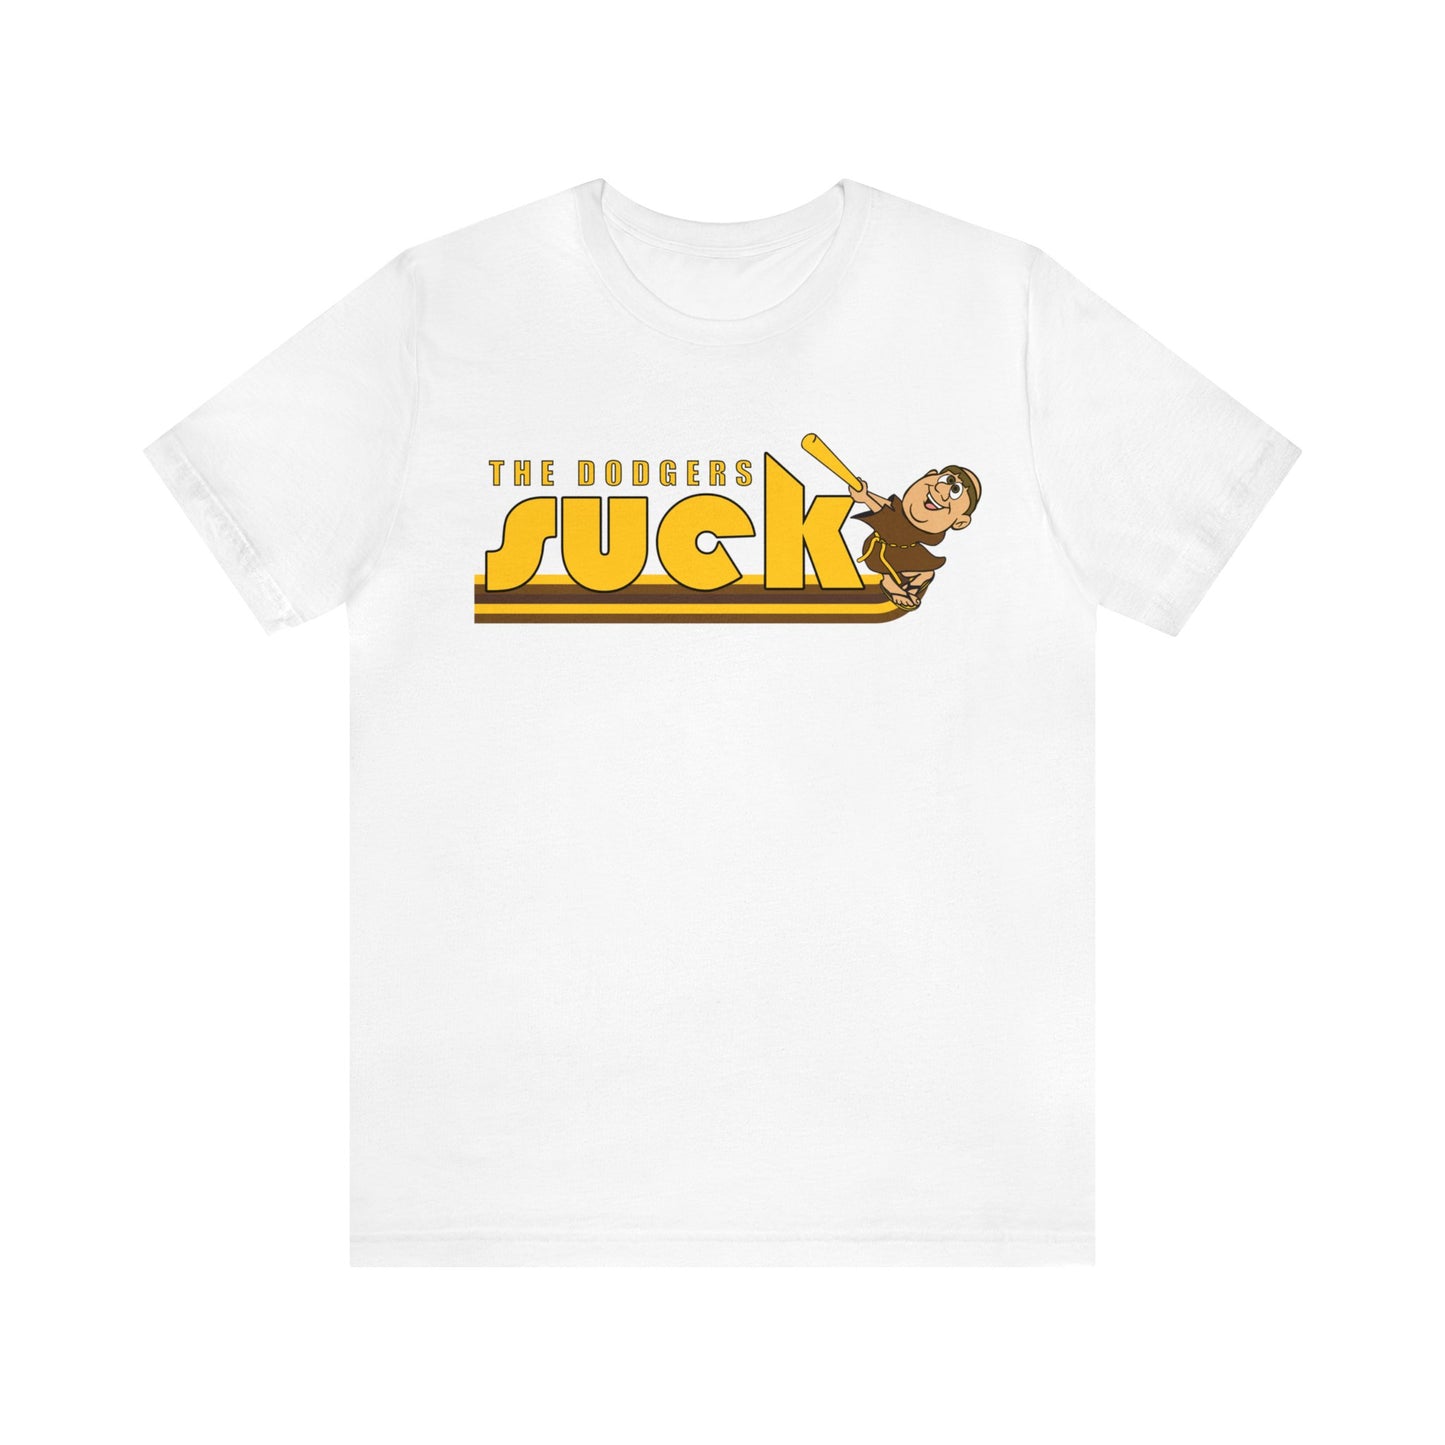 El Aye Dawjers Suck (for San Diego Padres fans) - Unisex Jersey Short Sleeve Tee